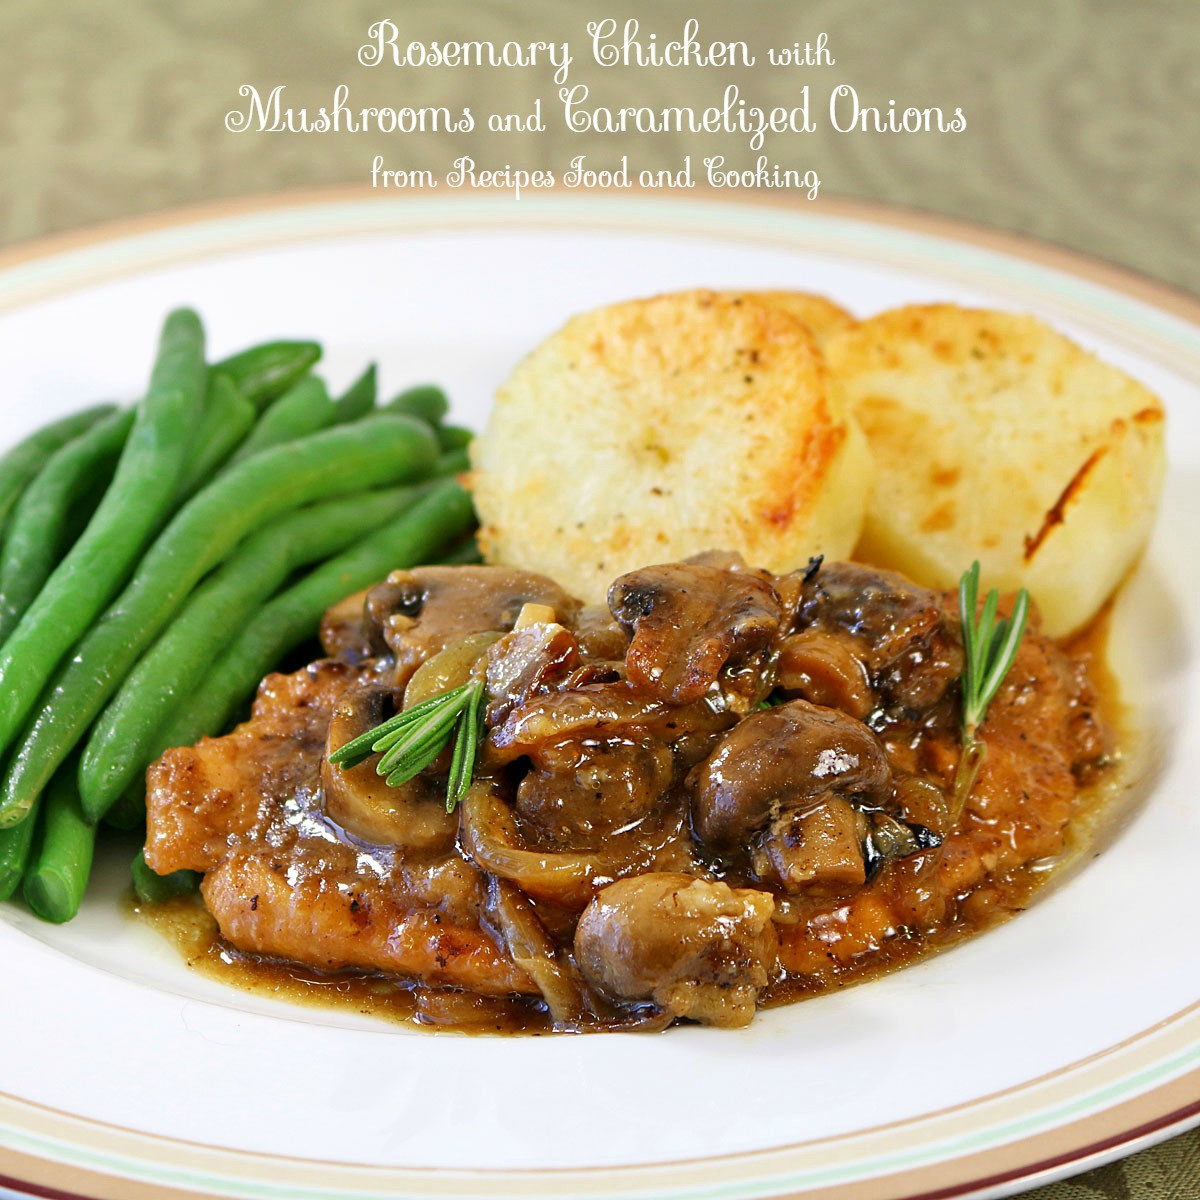 Chicken Breasts And Mushrooms Recipe
 Rosemary Chicken with Mushrooms and Caramelized ions